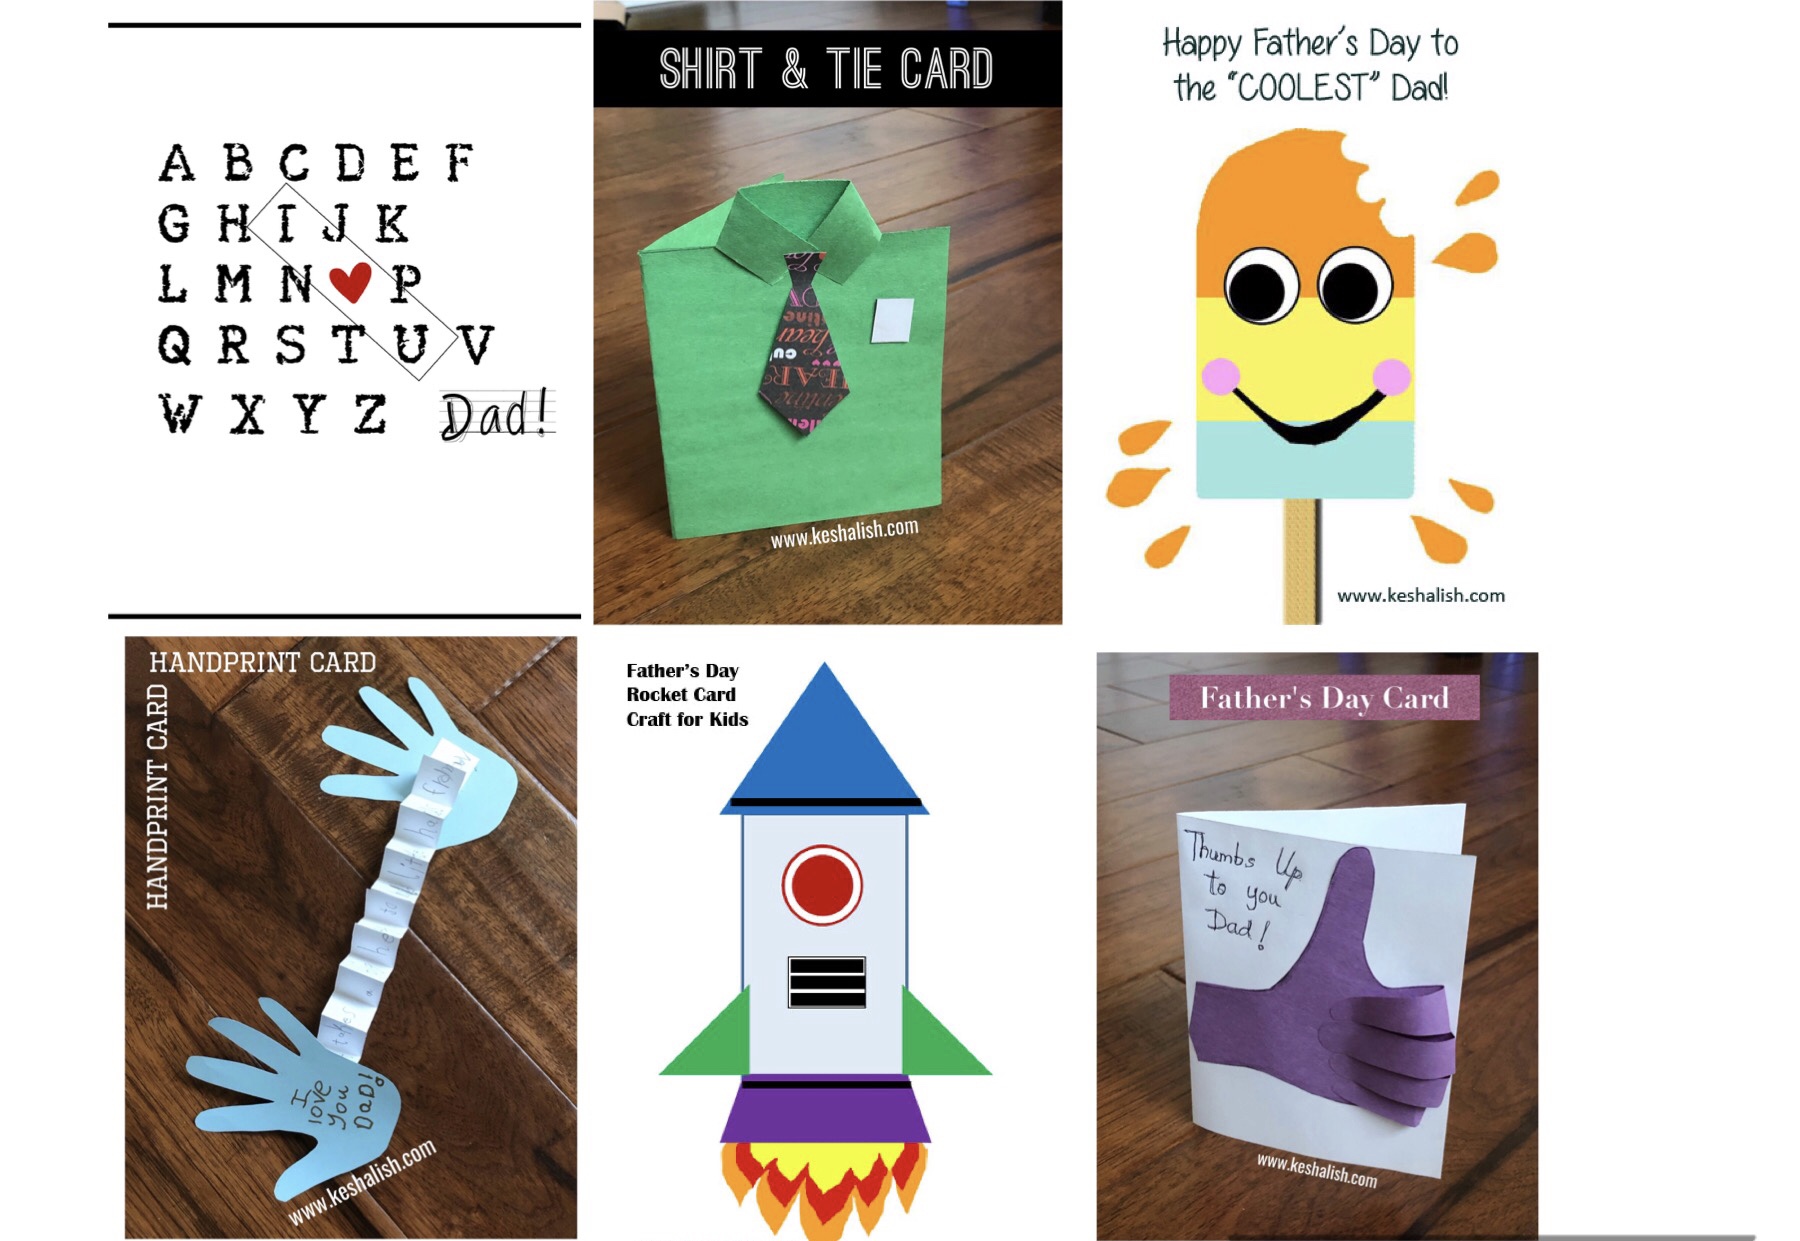 keshalish-6-easy-father-s-day-cards-for-kids-to-make-fathers-day